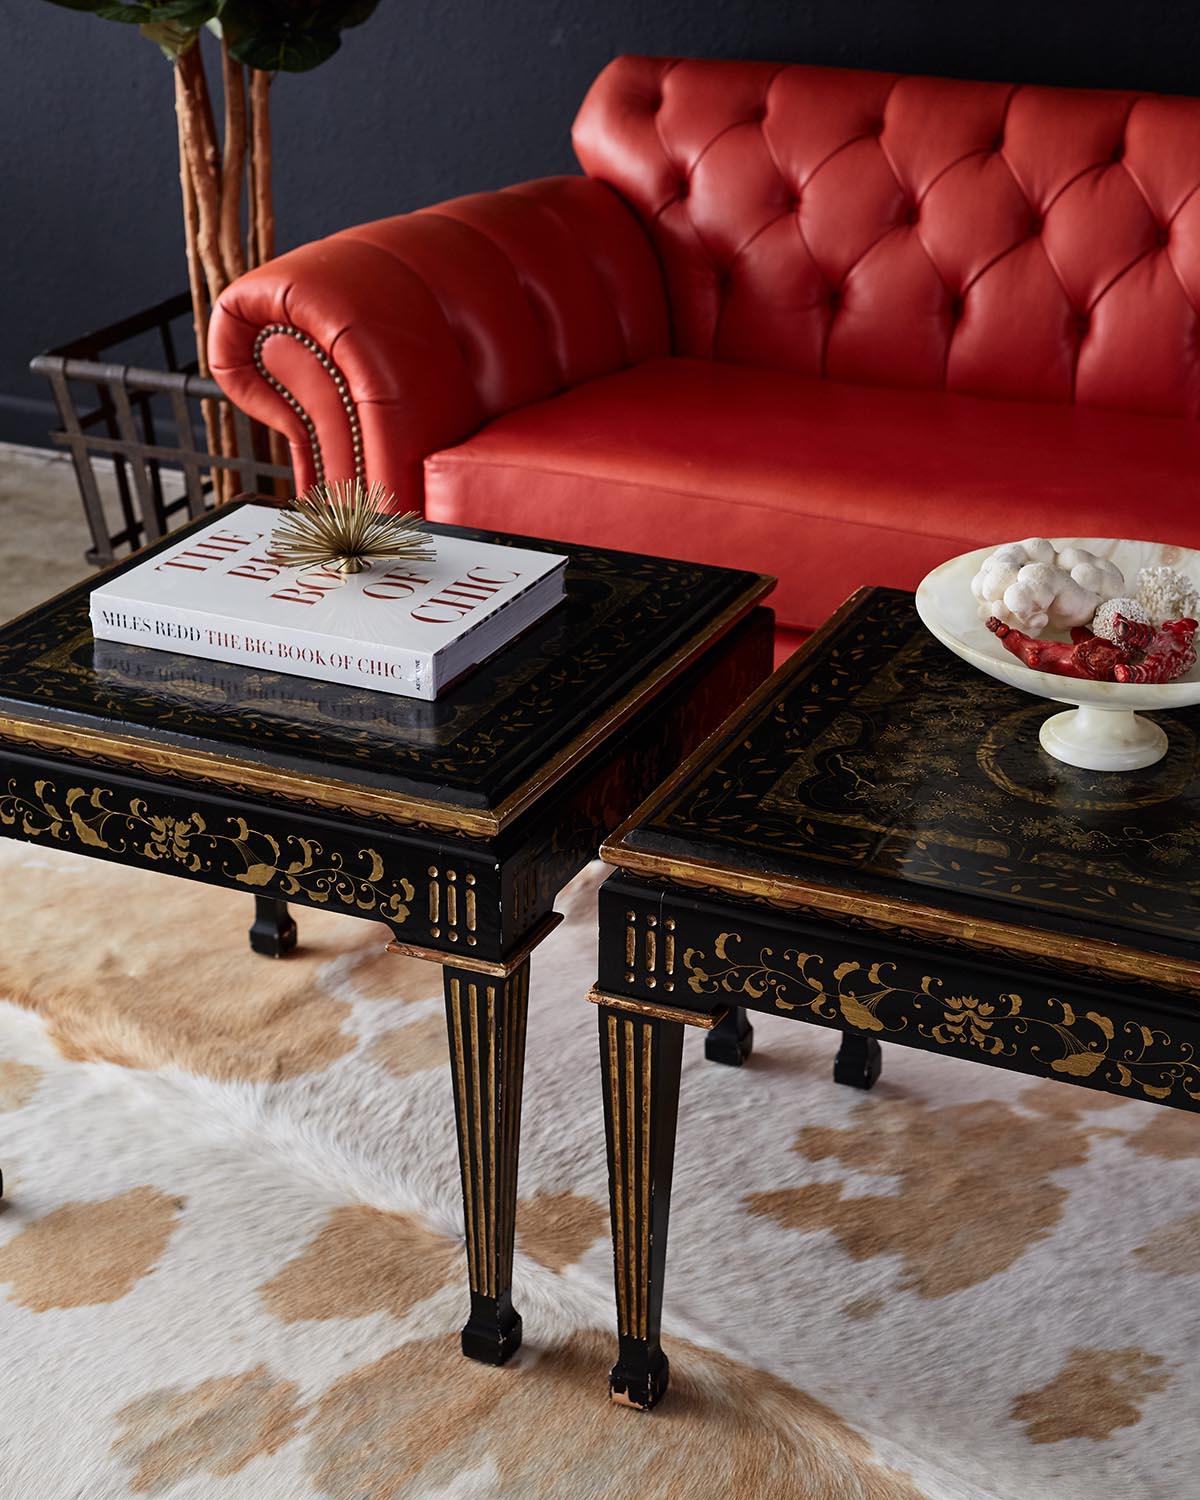 Lavish pair of Italian parcel gilt lacquered drinks tables or side tables made in the neoclassical taste. Featuring an old world style lacquer finish with intentional craquelure and distressing. The tops and each side are decorated with hand-painted